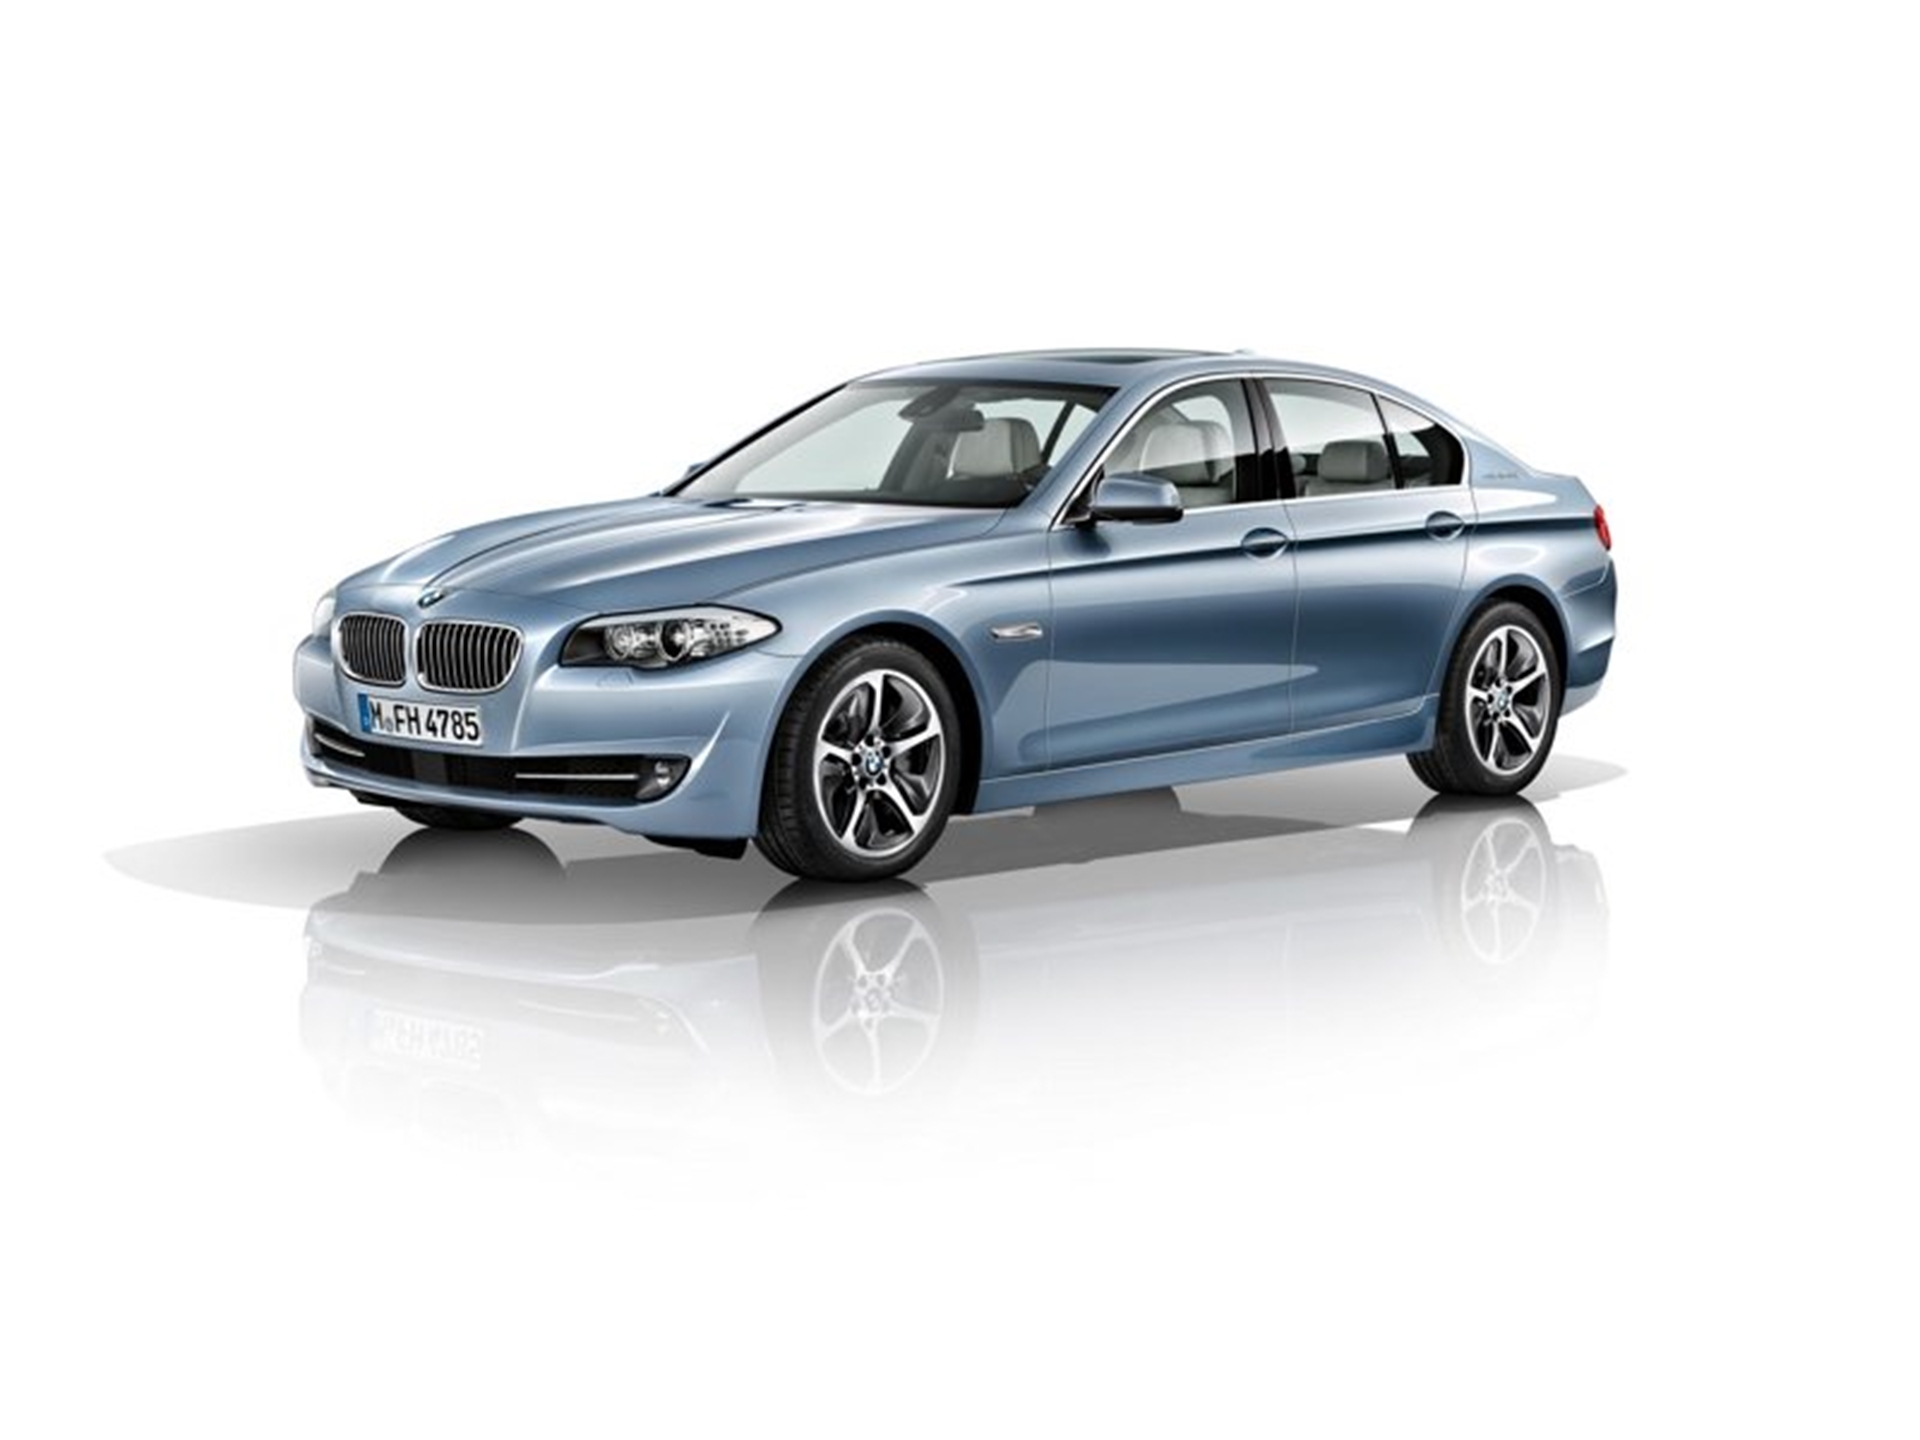 BMW Announces Pricing for the new 2012 ActiveHybrid 5